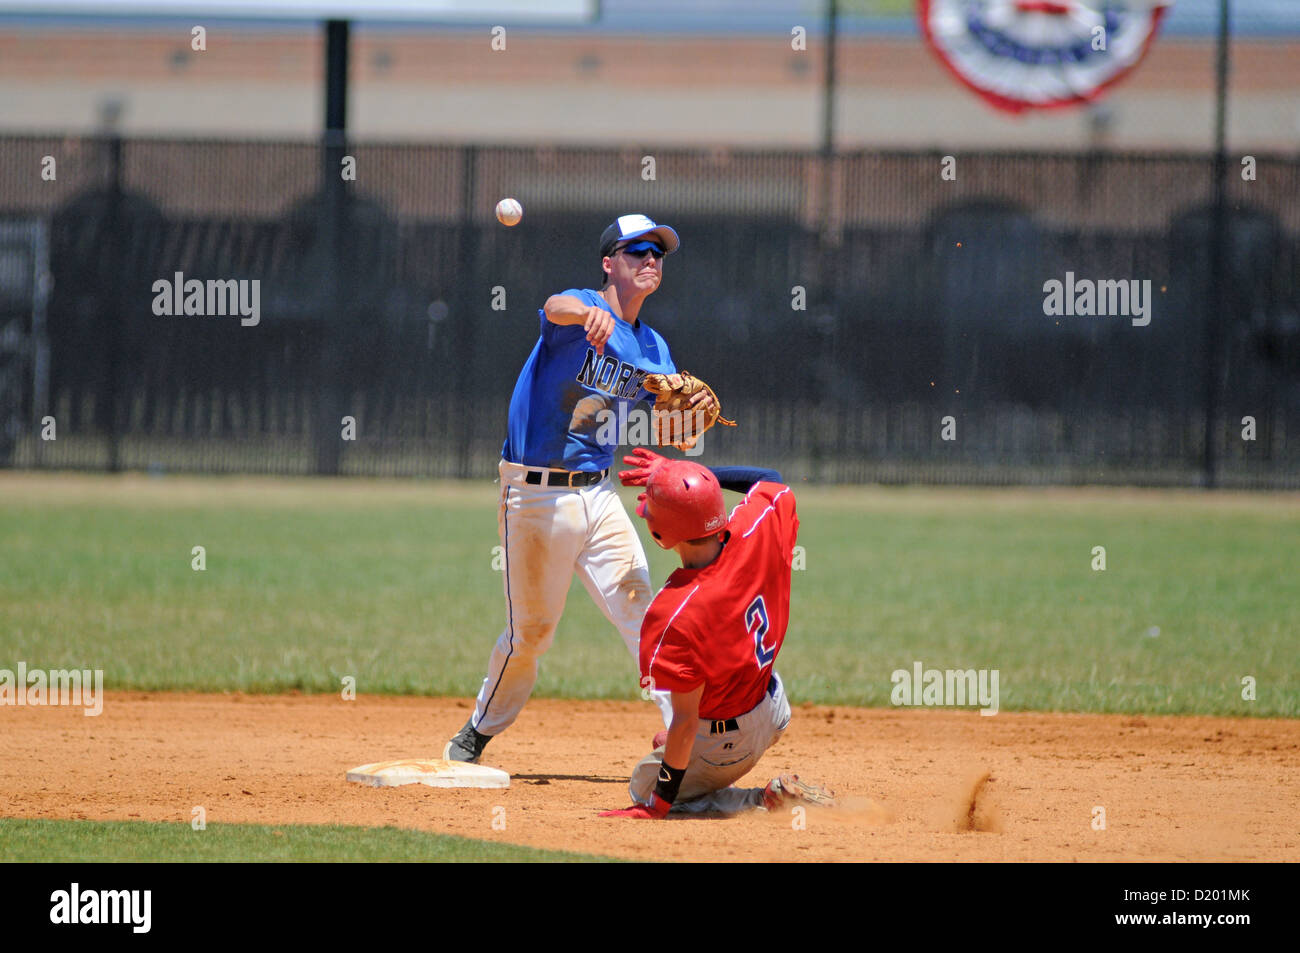 Baseball Second baseman throws to first base on double play. USA. Stock Photo